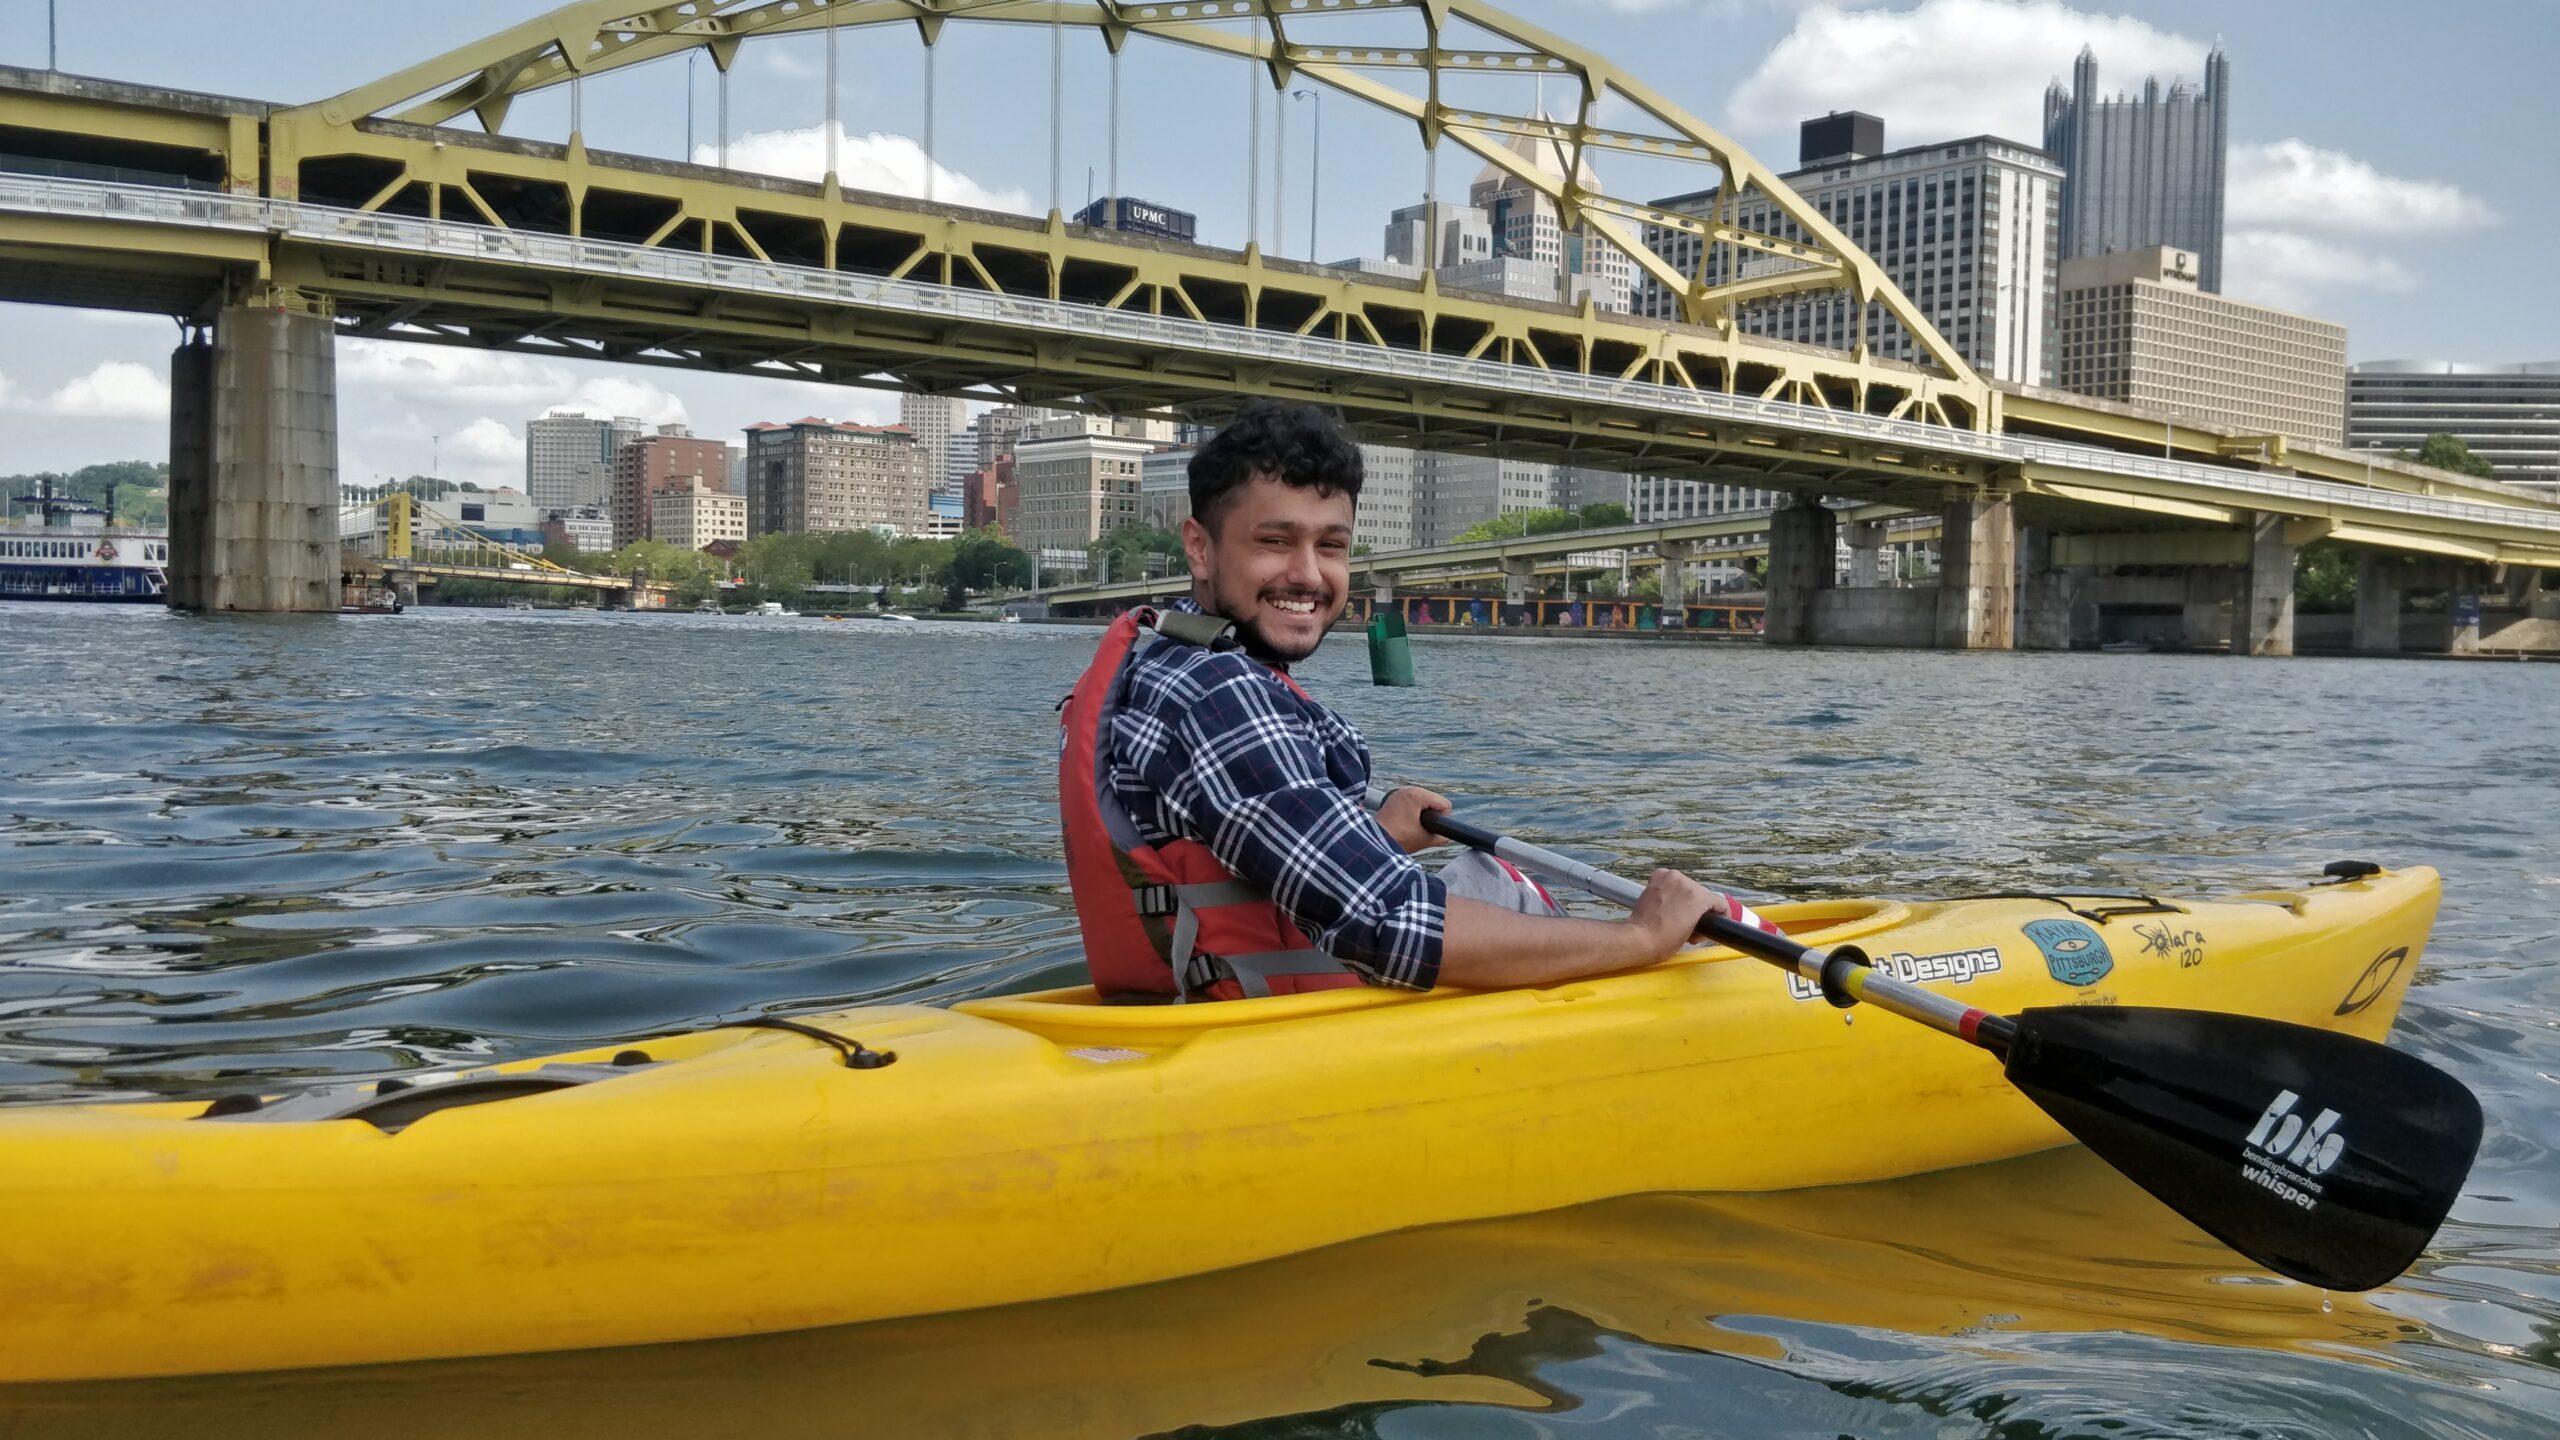 "Kayaking always gives the impression of an activity you do in a valley area surrounded by mountains. The good thing about Pittsburgh downtown kayaking is the views of two rivers merge, hills, stadiums, and a whole downtown on one side. This experience was very unique and rewarding."